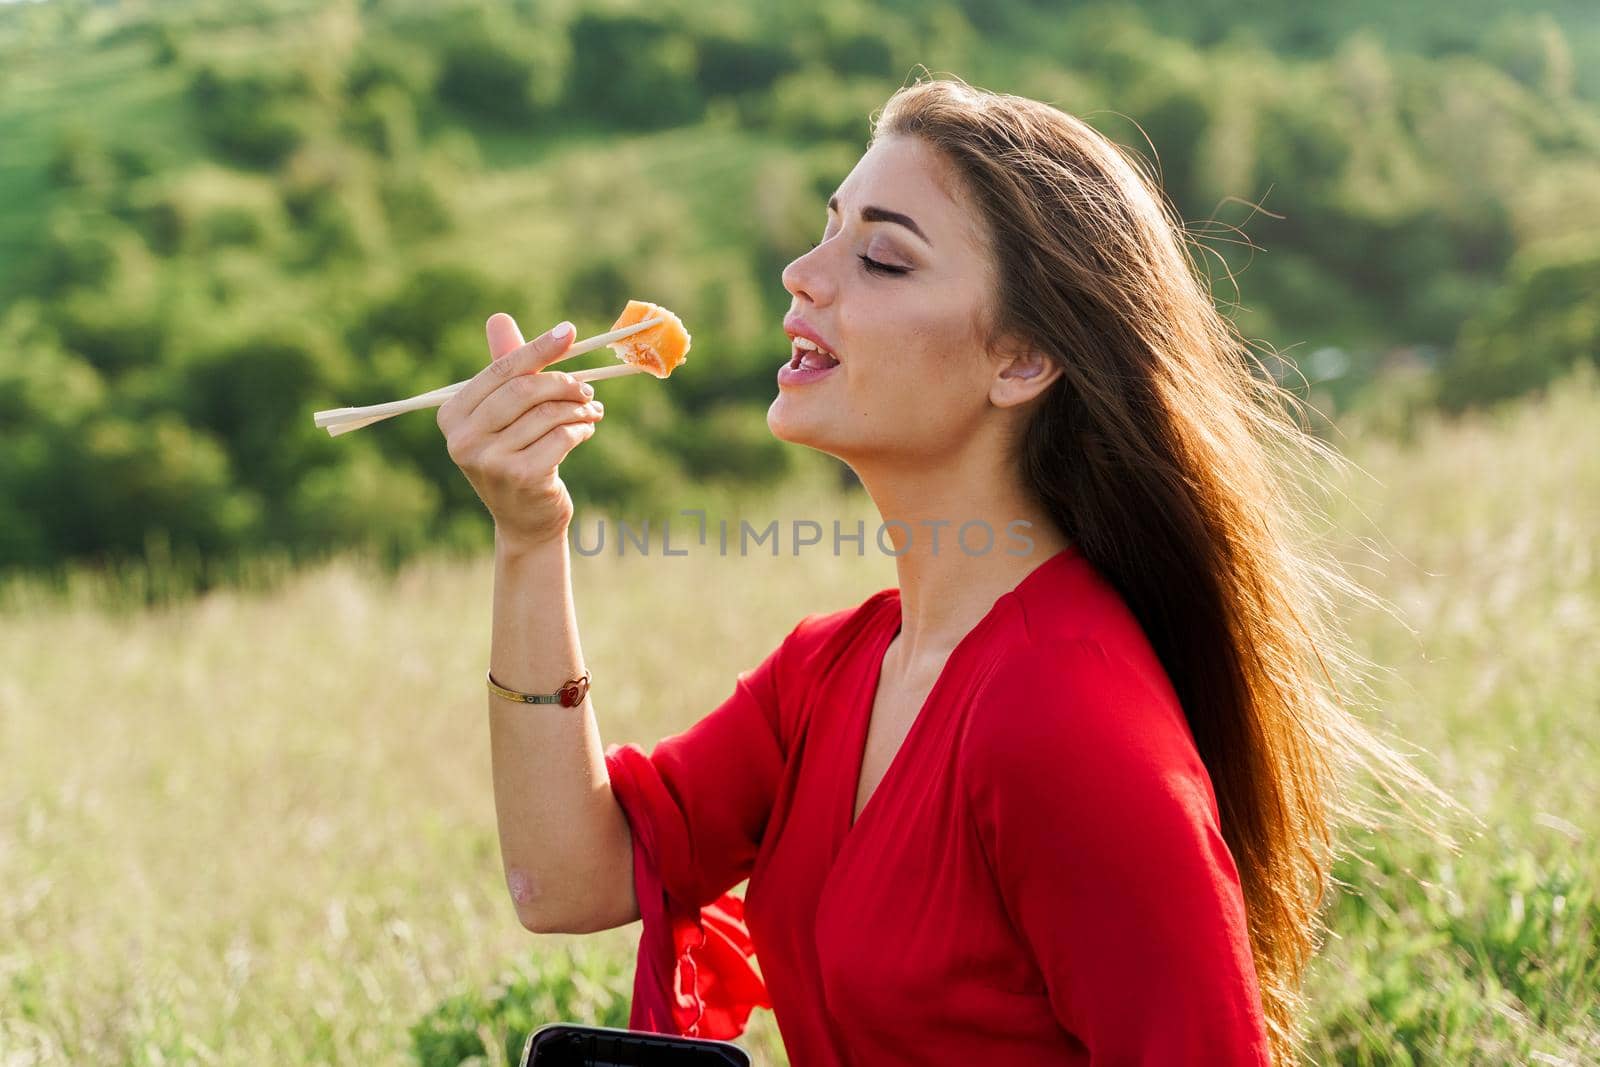 Sushi set and girl who reach out to bite sushi on green hills background. Food delivery service from japanese restaurant. Woman with blue eyes in red dress seats and eats sushi delivered by courier